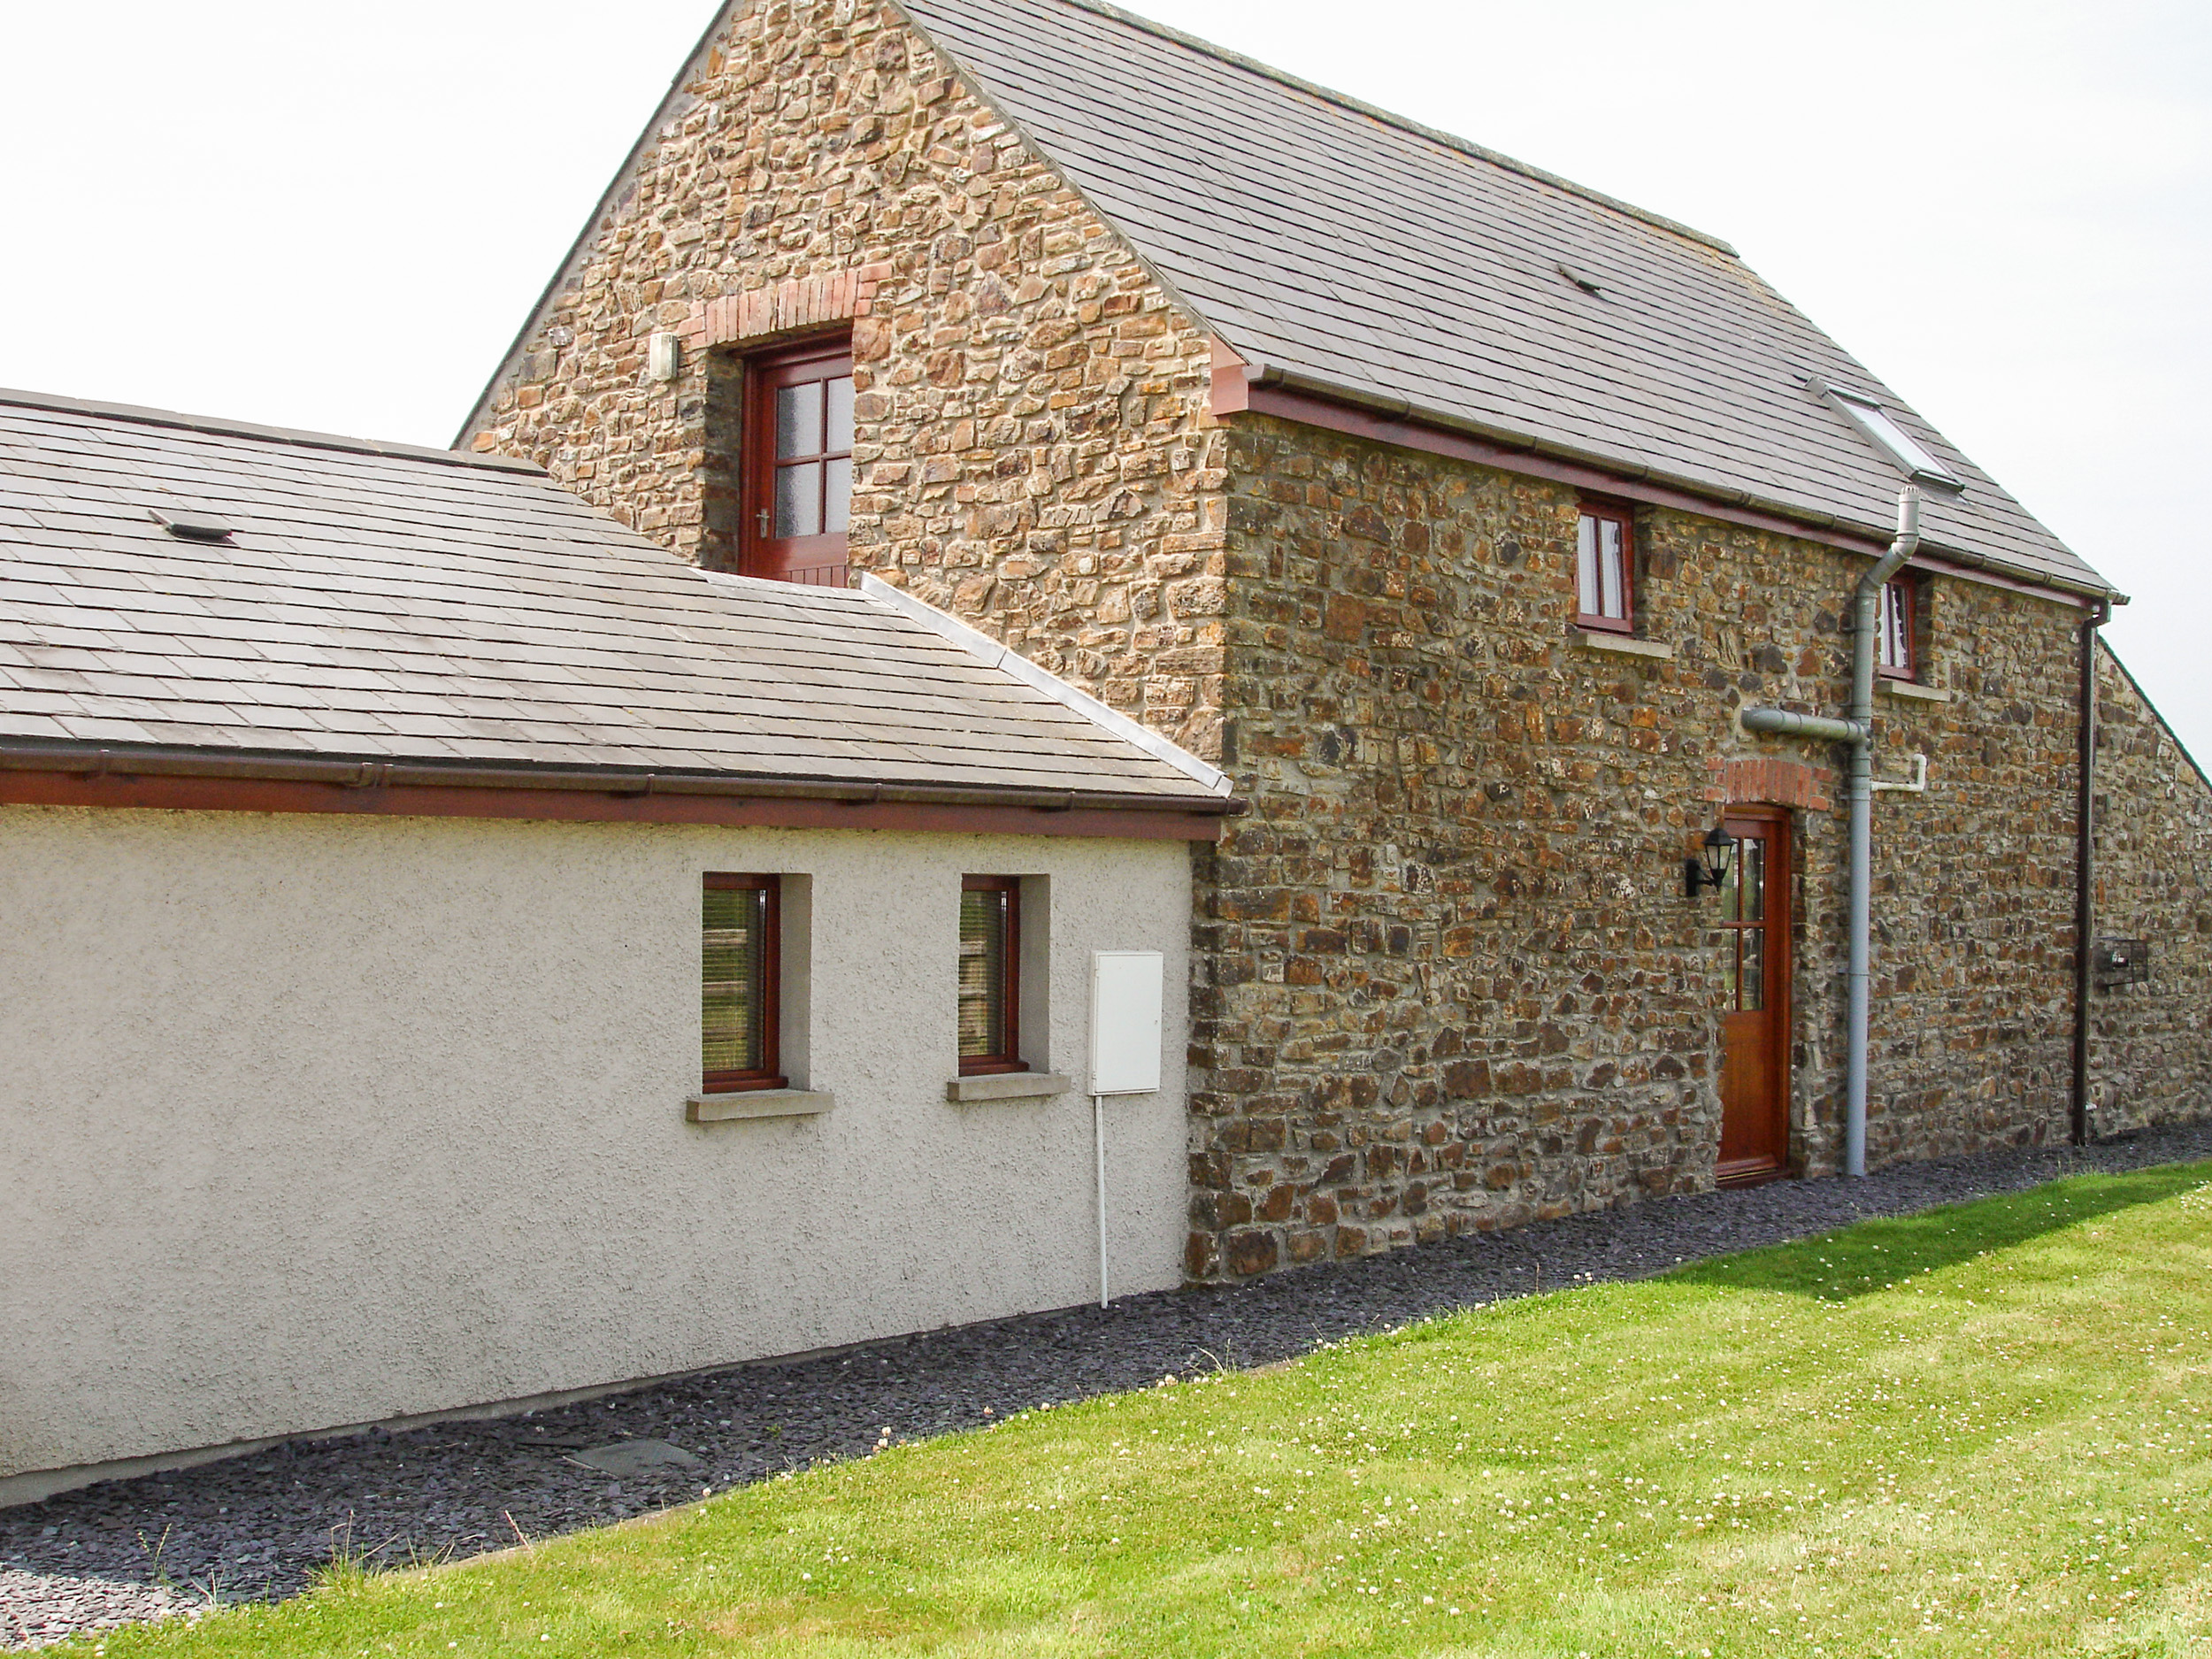 3 bedroom Cottage for rent in Dyfed